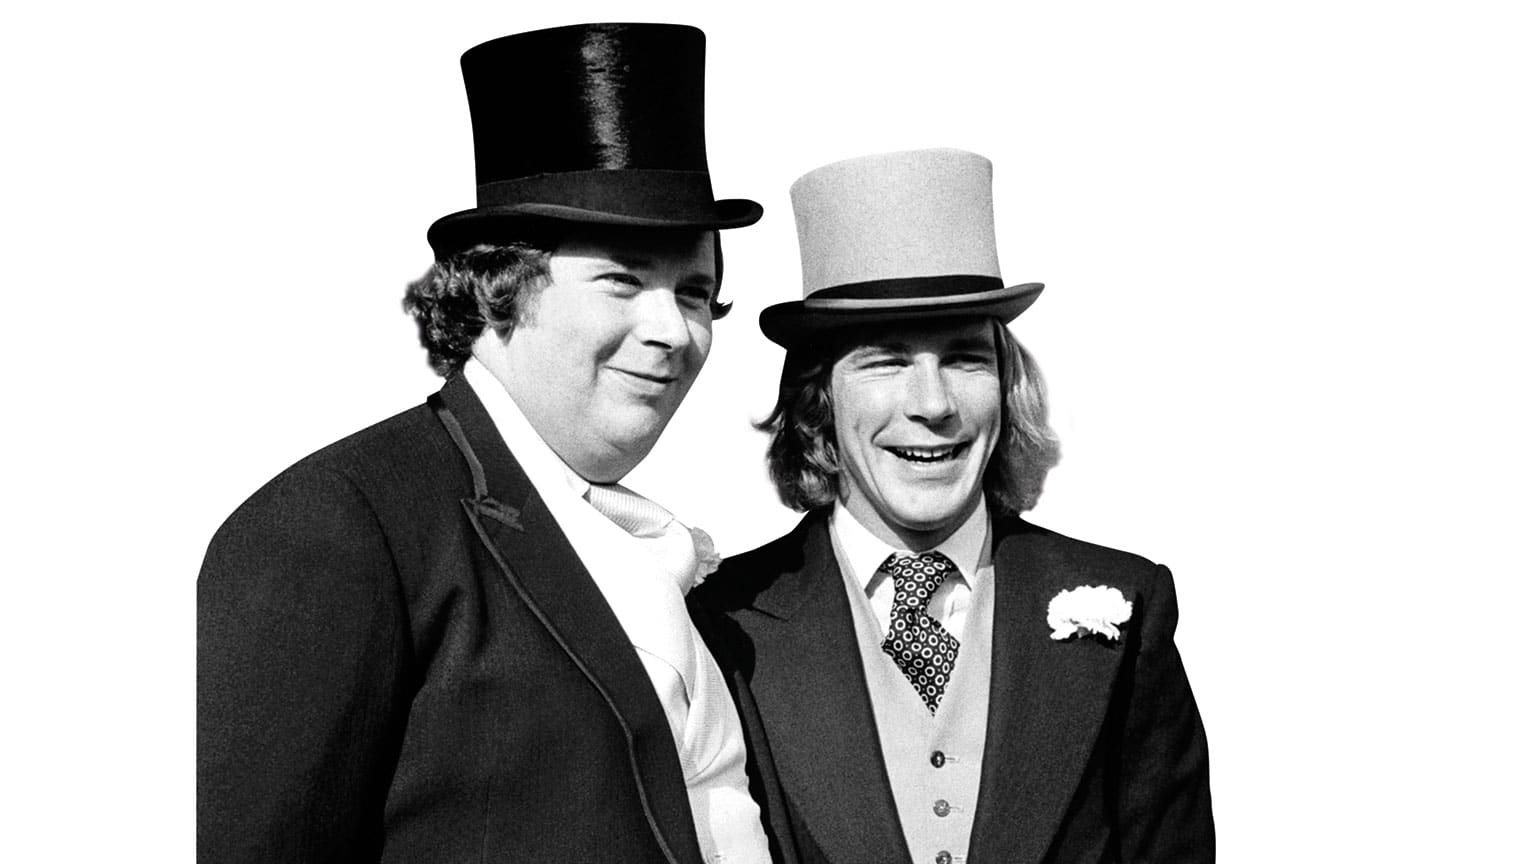 Lord Hesketh with James hunt